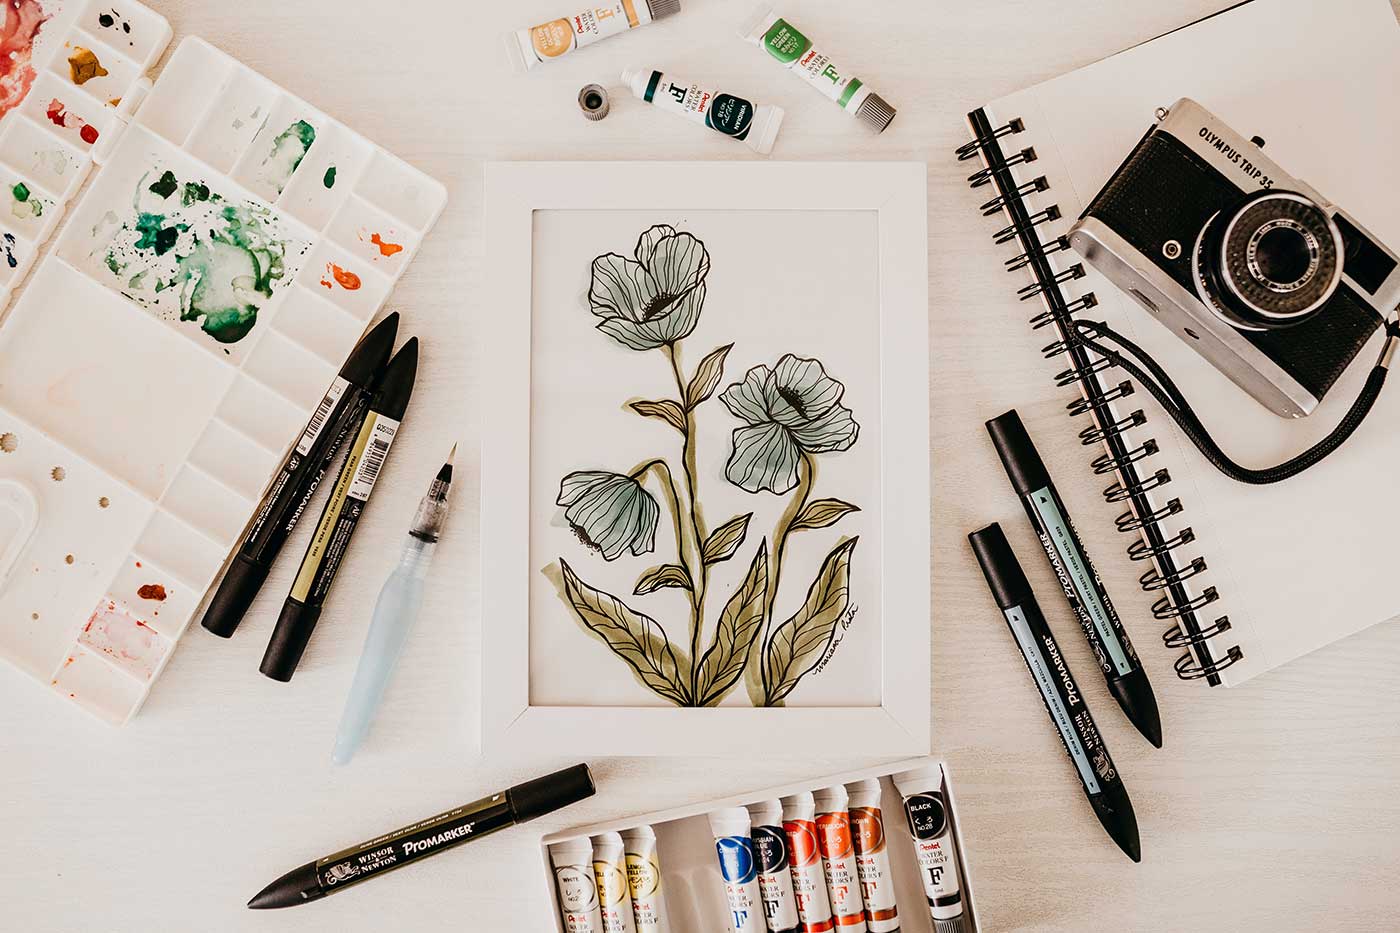 Artistic flat lay photograph featuring paints and a watercolour flower